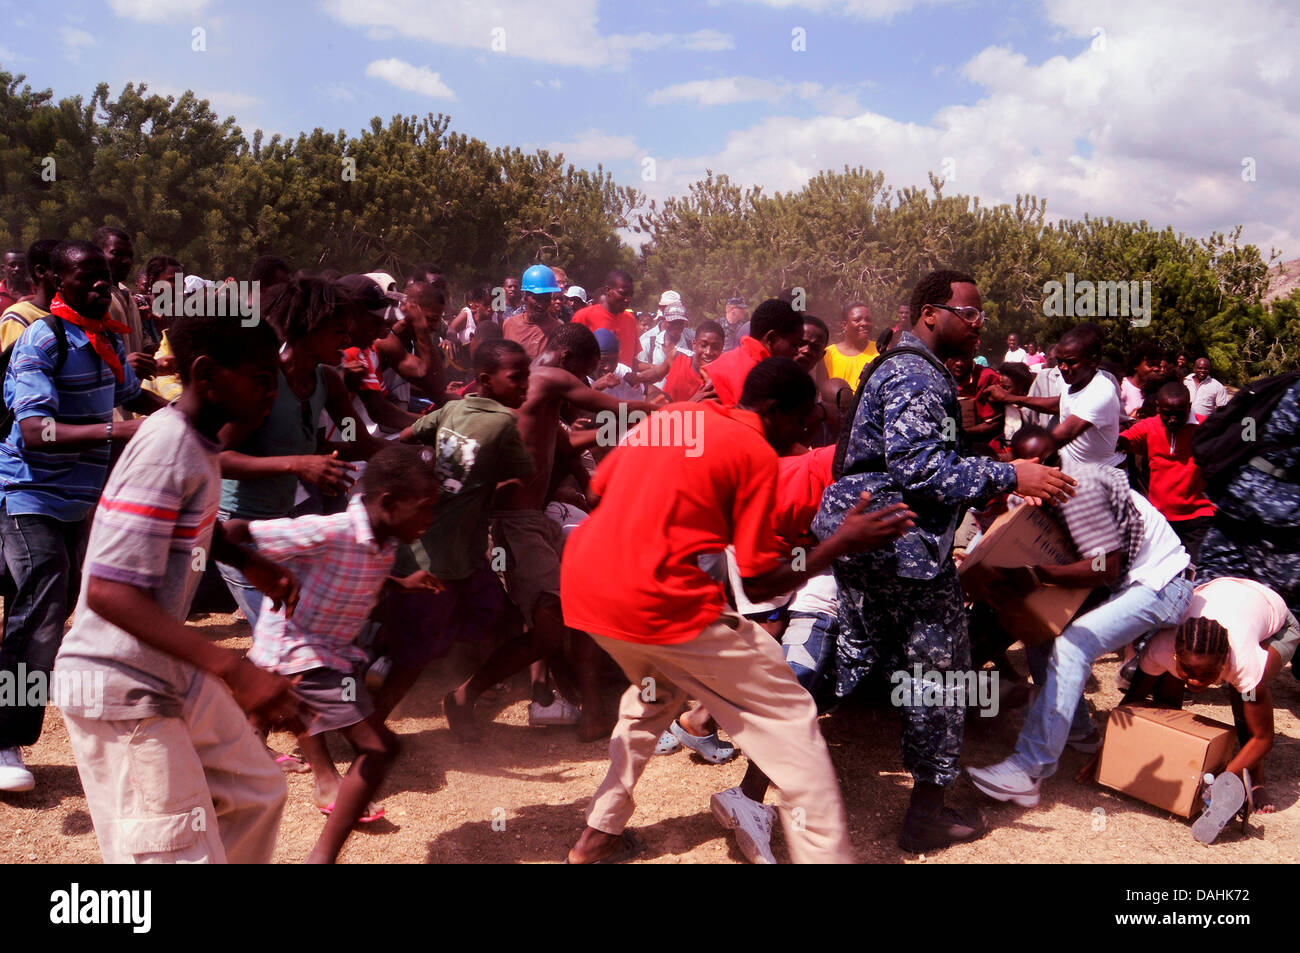 Haitians jostle for food rations at a US Navy aid distribution center in the aftermath of the 7.0 magnitude earthquake that killed 220,000 people February 17, 2010 in Port-au-Prince, Haiti. Stock Photo